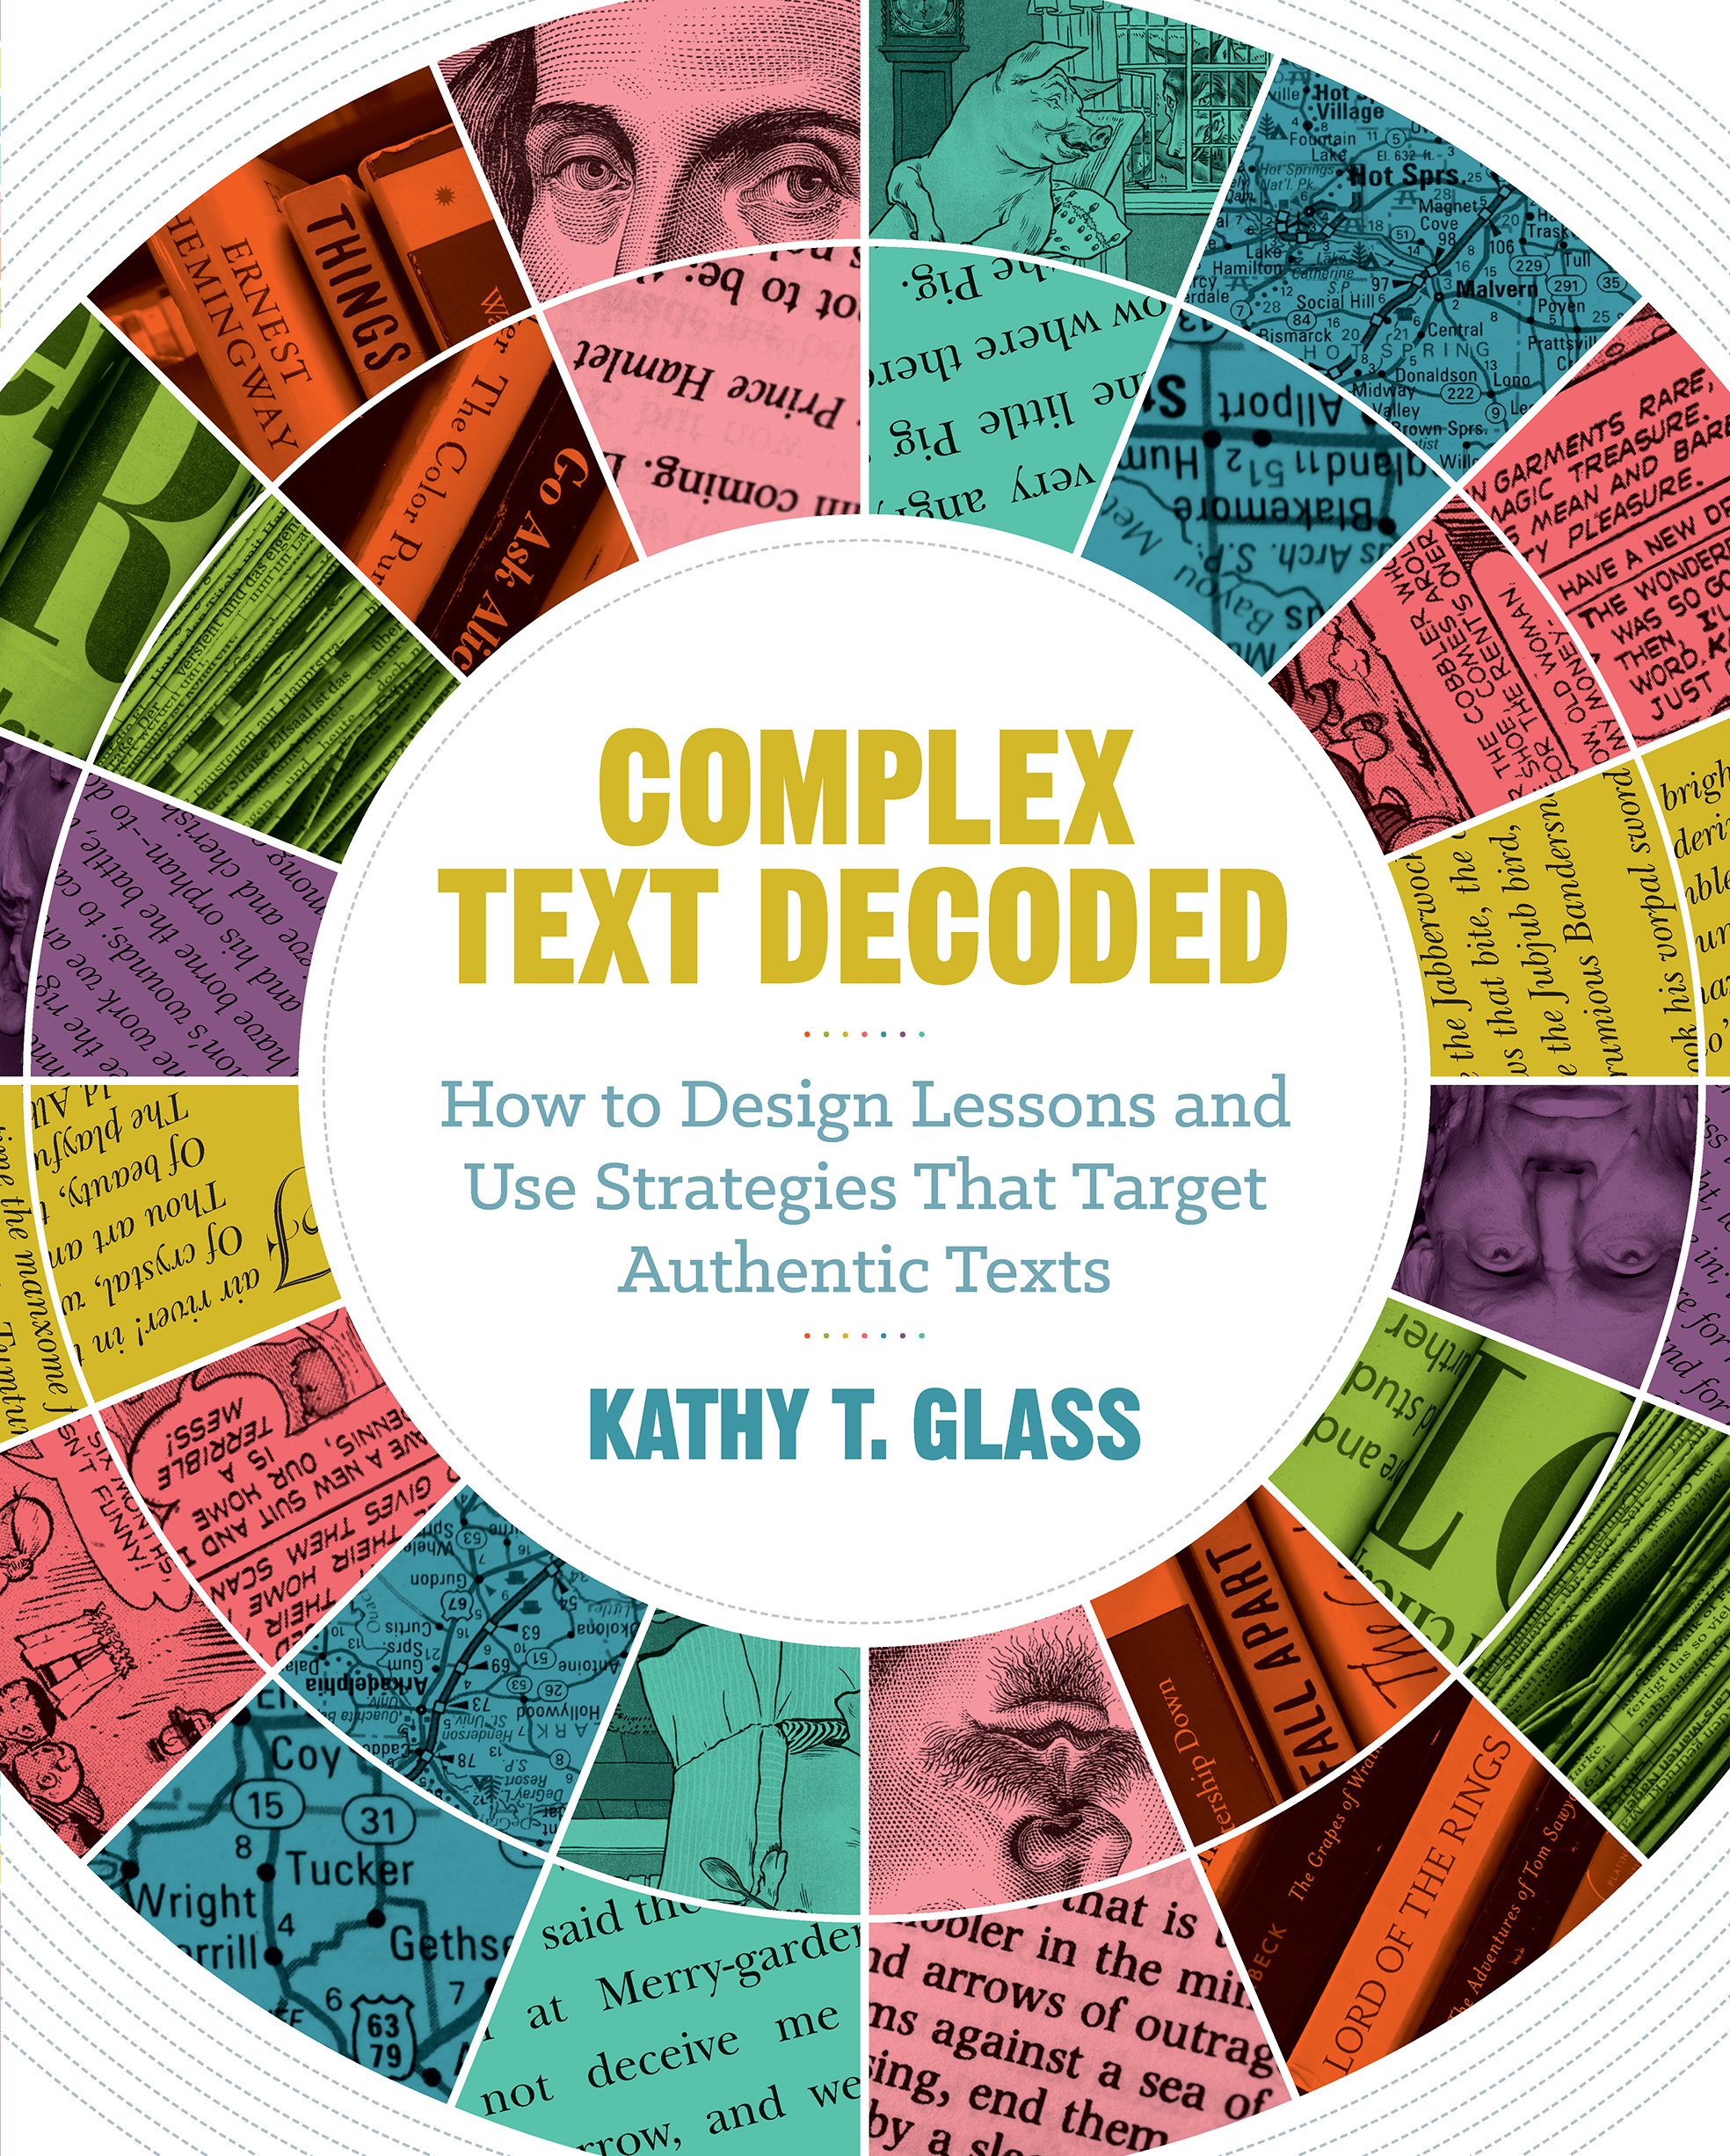 T me glass pdf. Product Design Lessons. Decode text. Decoded book.